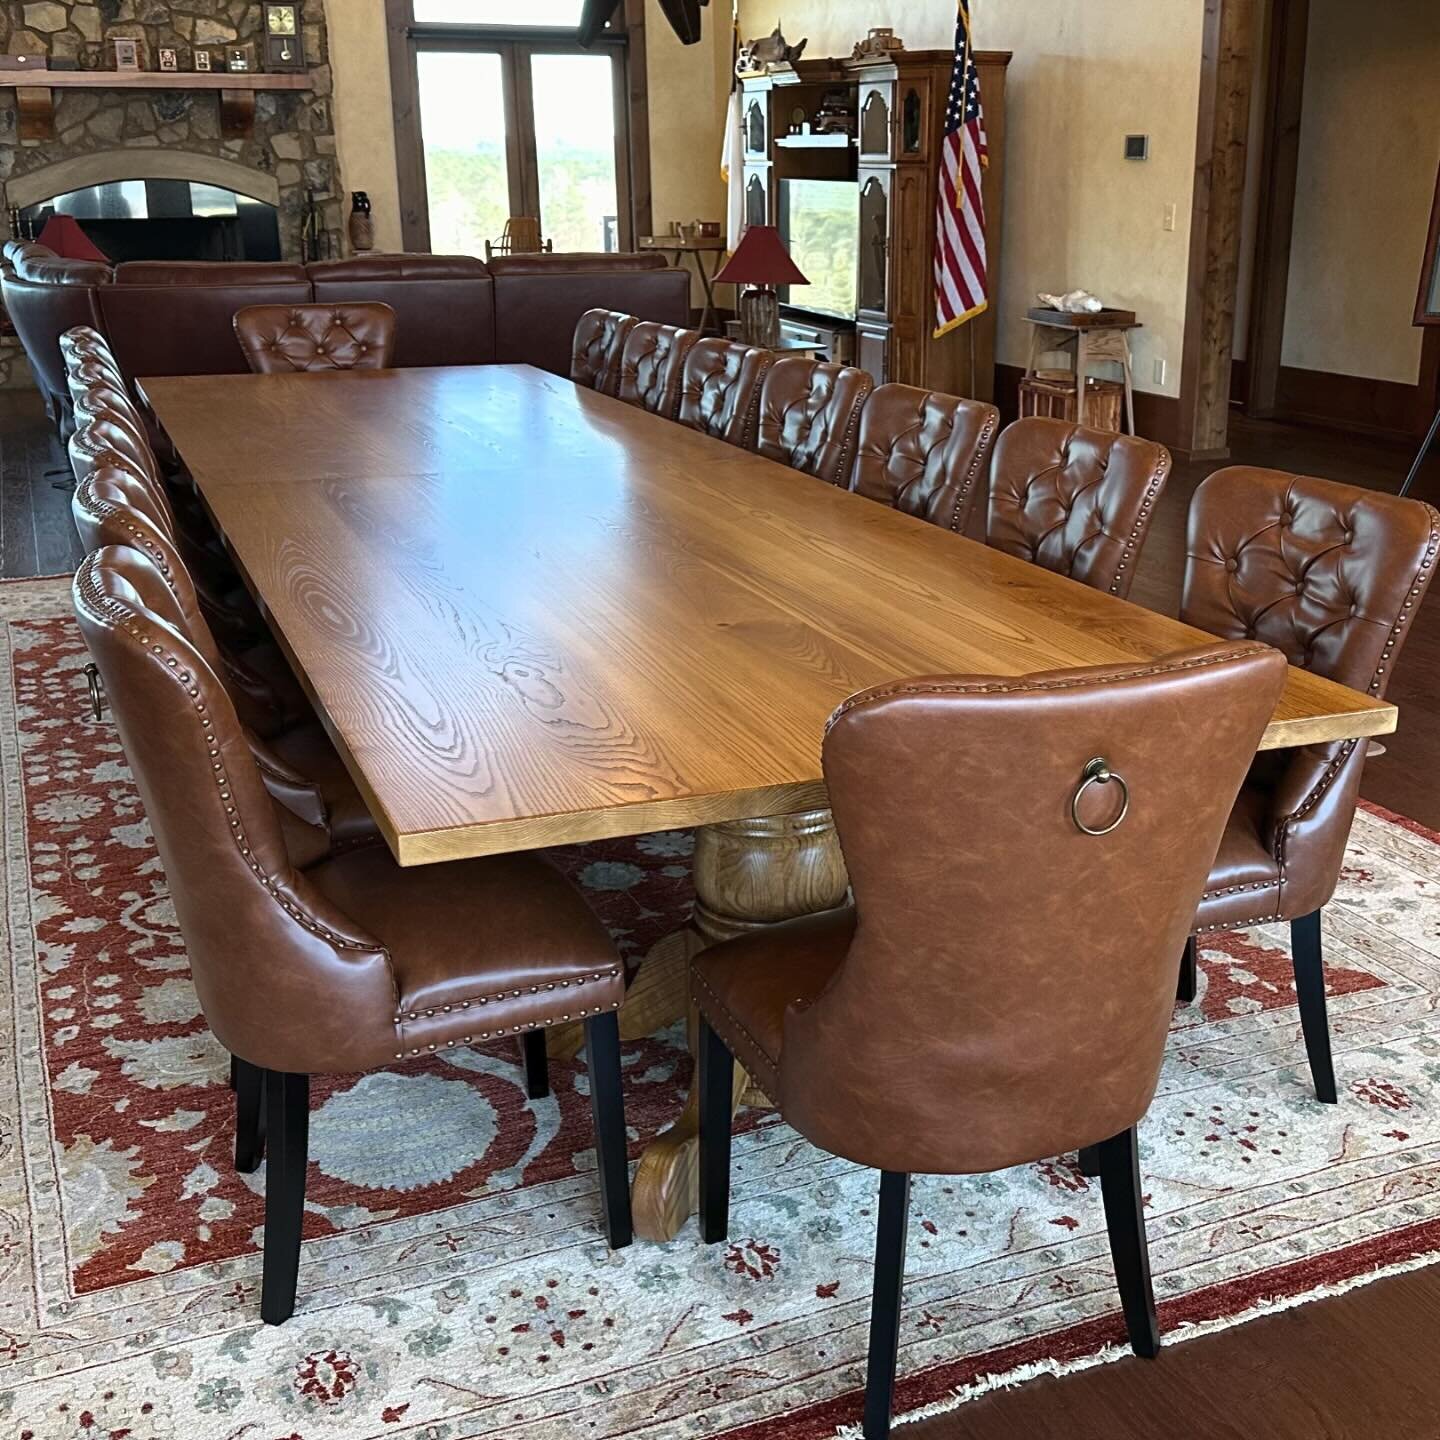 One 16&rsquo; dining table delivered in time for Christmas dinner. Solid ash and red oak stained Minwax Golden Oak. Old school style table for sure but still a fun design to build. 
#diningtable #holidays #christmasdecor #diningrooms